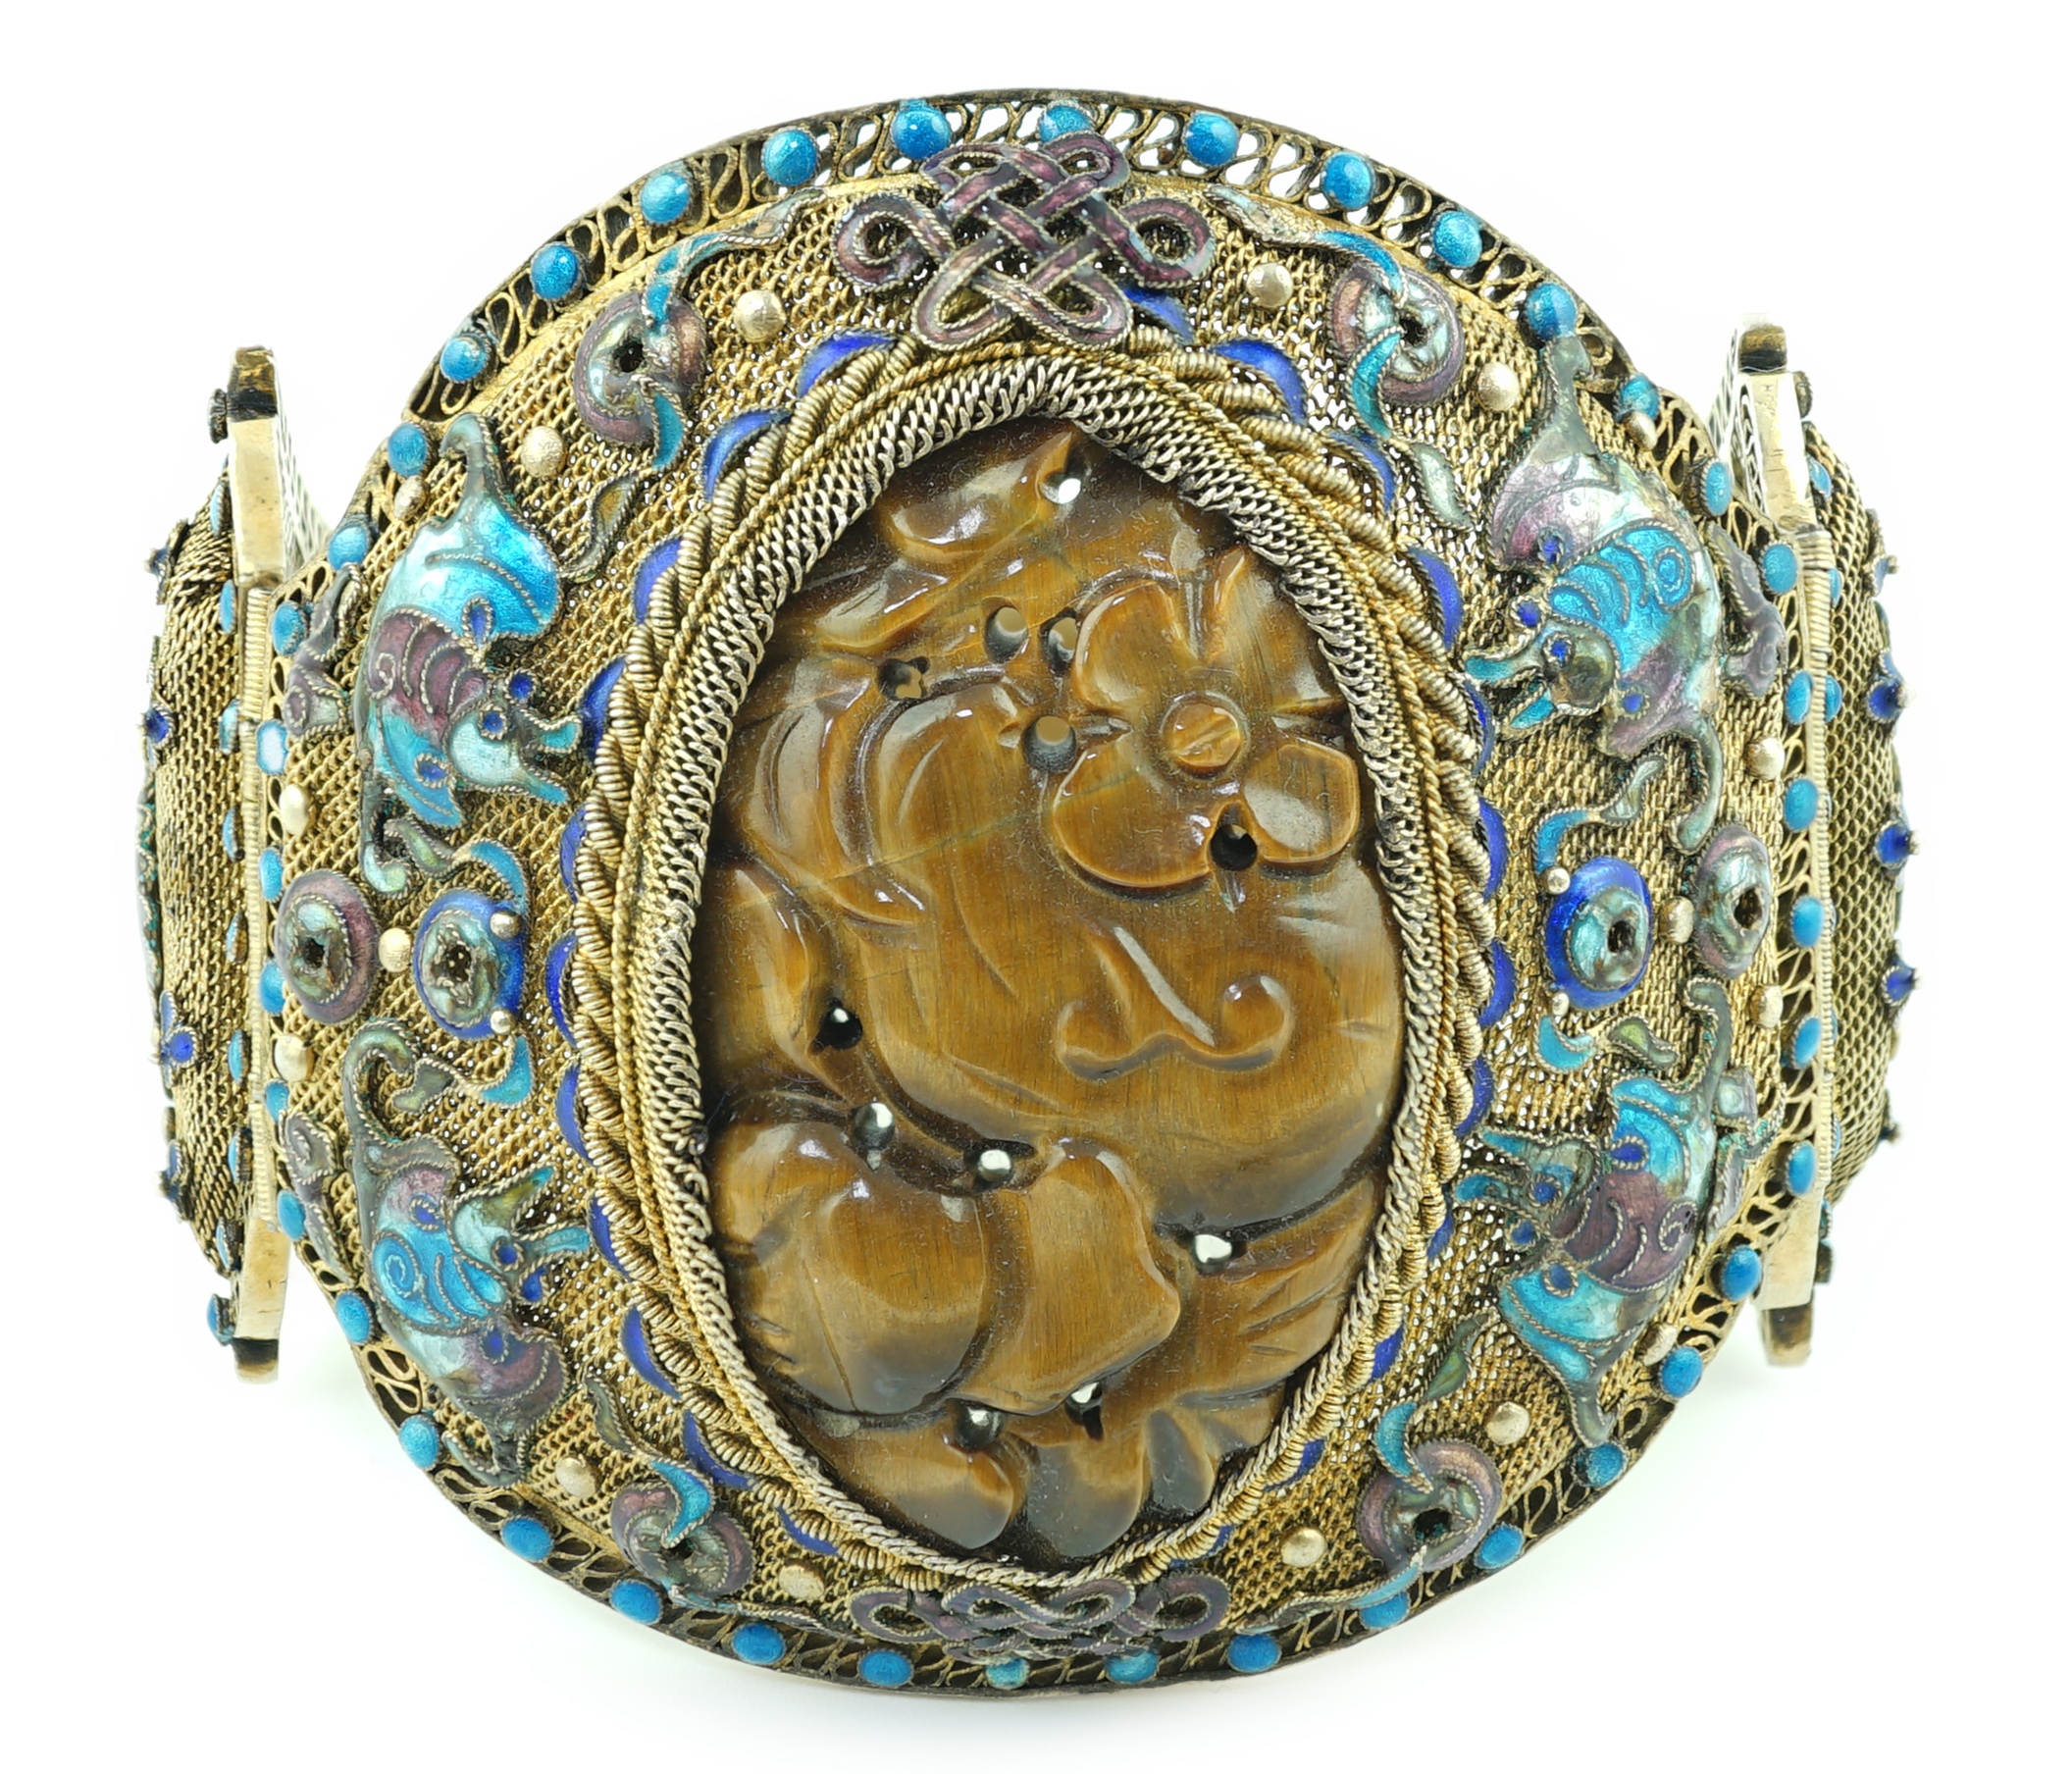 A Chinese silver-gilt, enamel and tiger's-eye bracelet, early 20th century